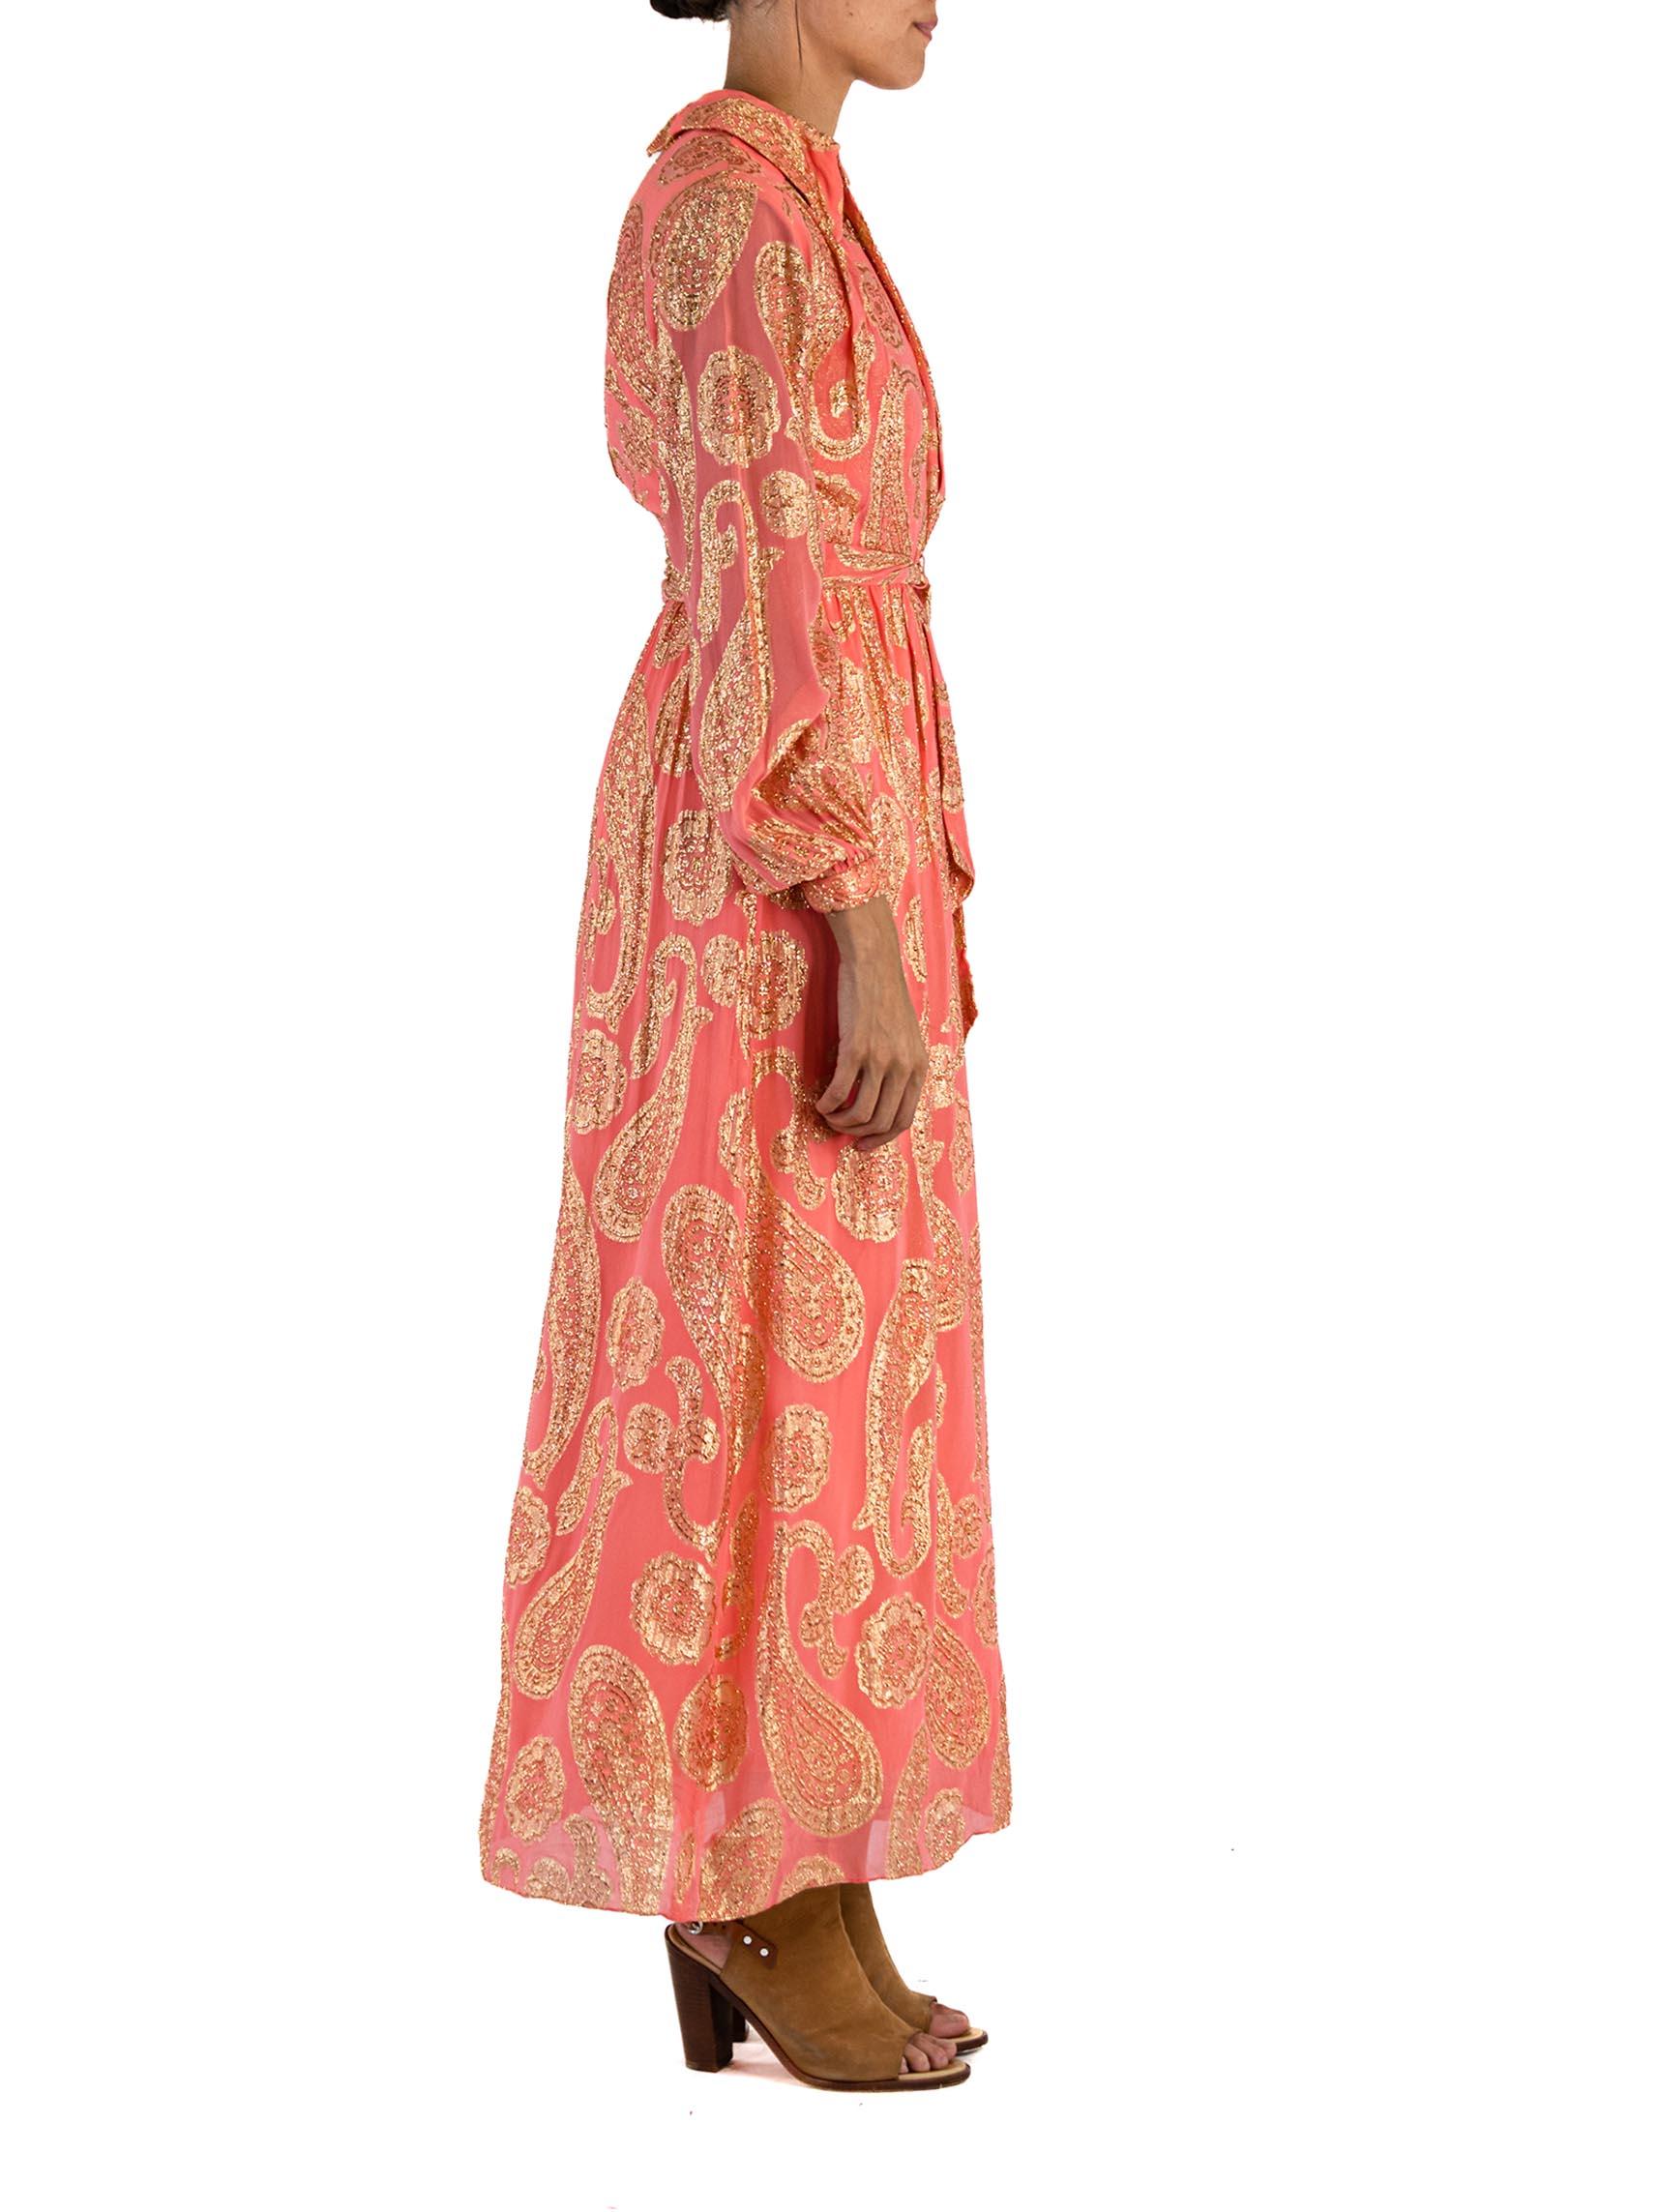 Women's 1970S CARRIE COUTURE Pink Gold Lamé Silk Fil Coupé Dress With Belt For Sale